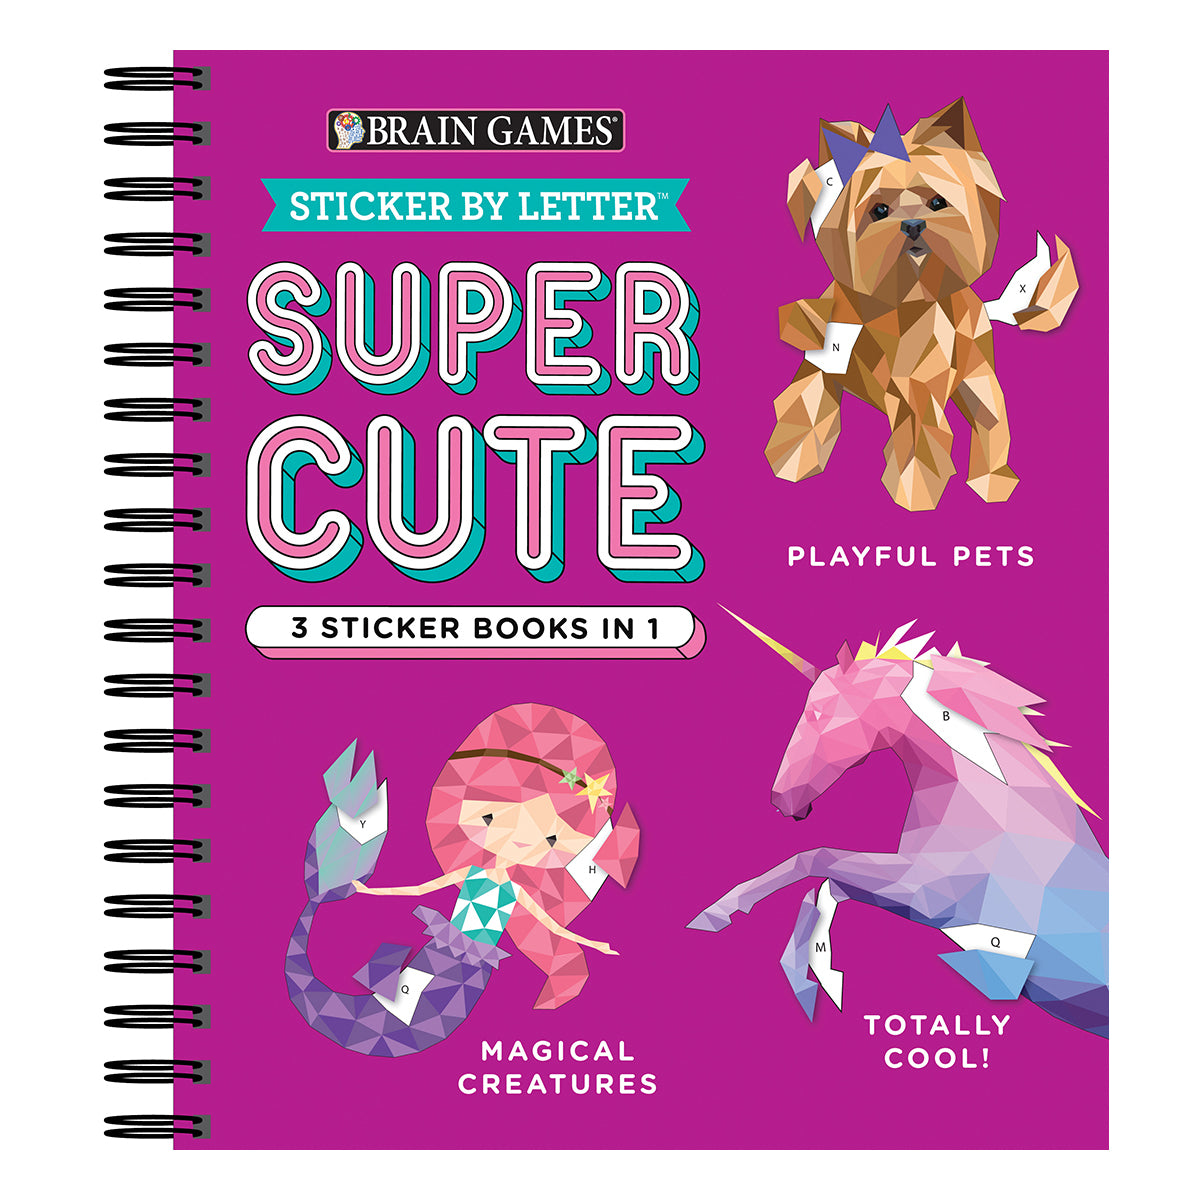 Brain Games  Sticker by Letter Super Cute  3 Sticker Books in 1 30 Images to Sticker Playful Pets Totally Cool! Magical Creatures